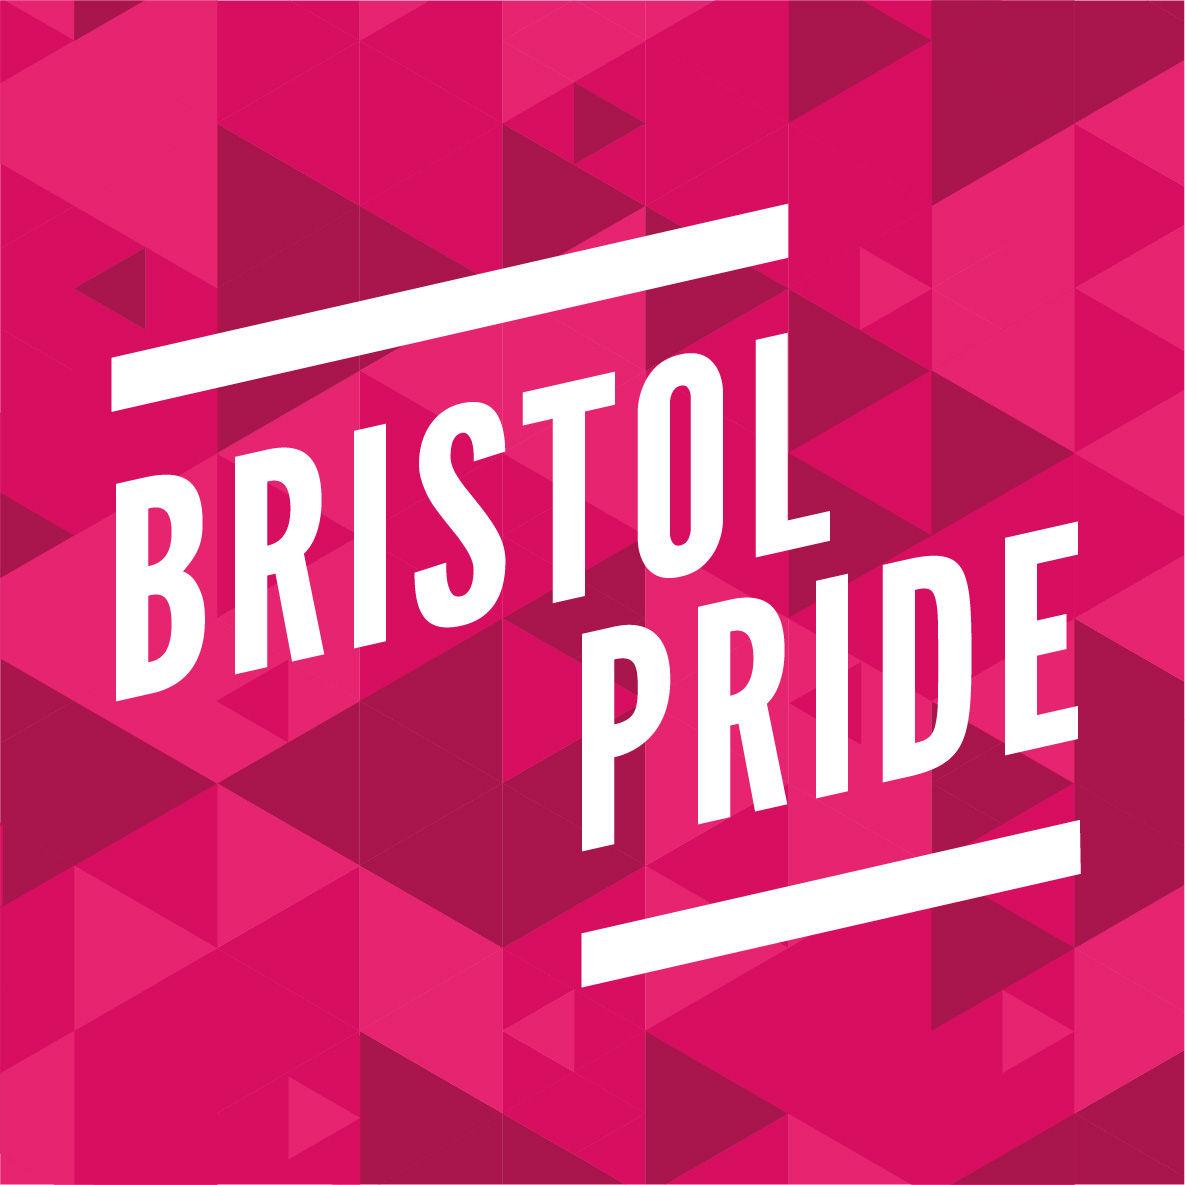 Bristol Pride Day: First Artists Announced